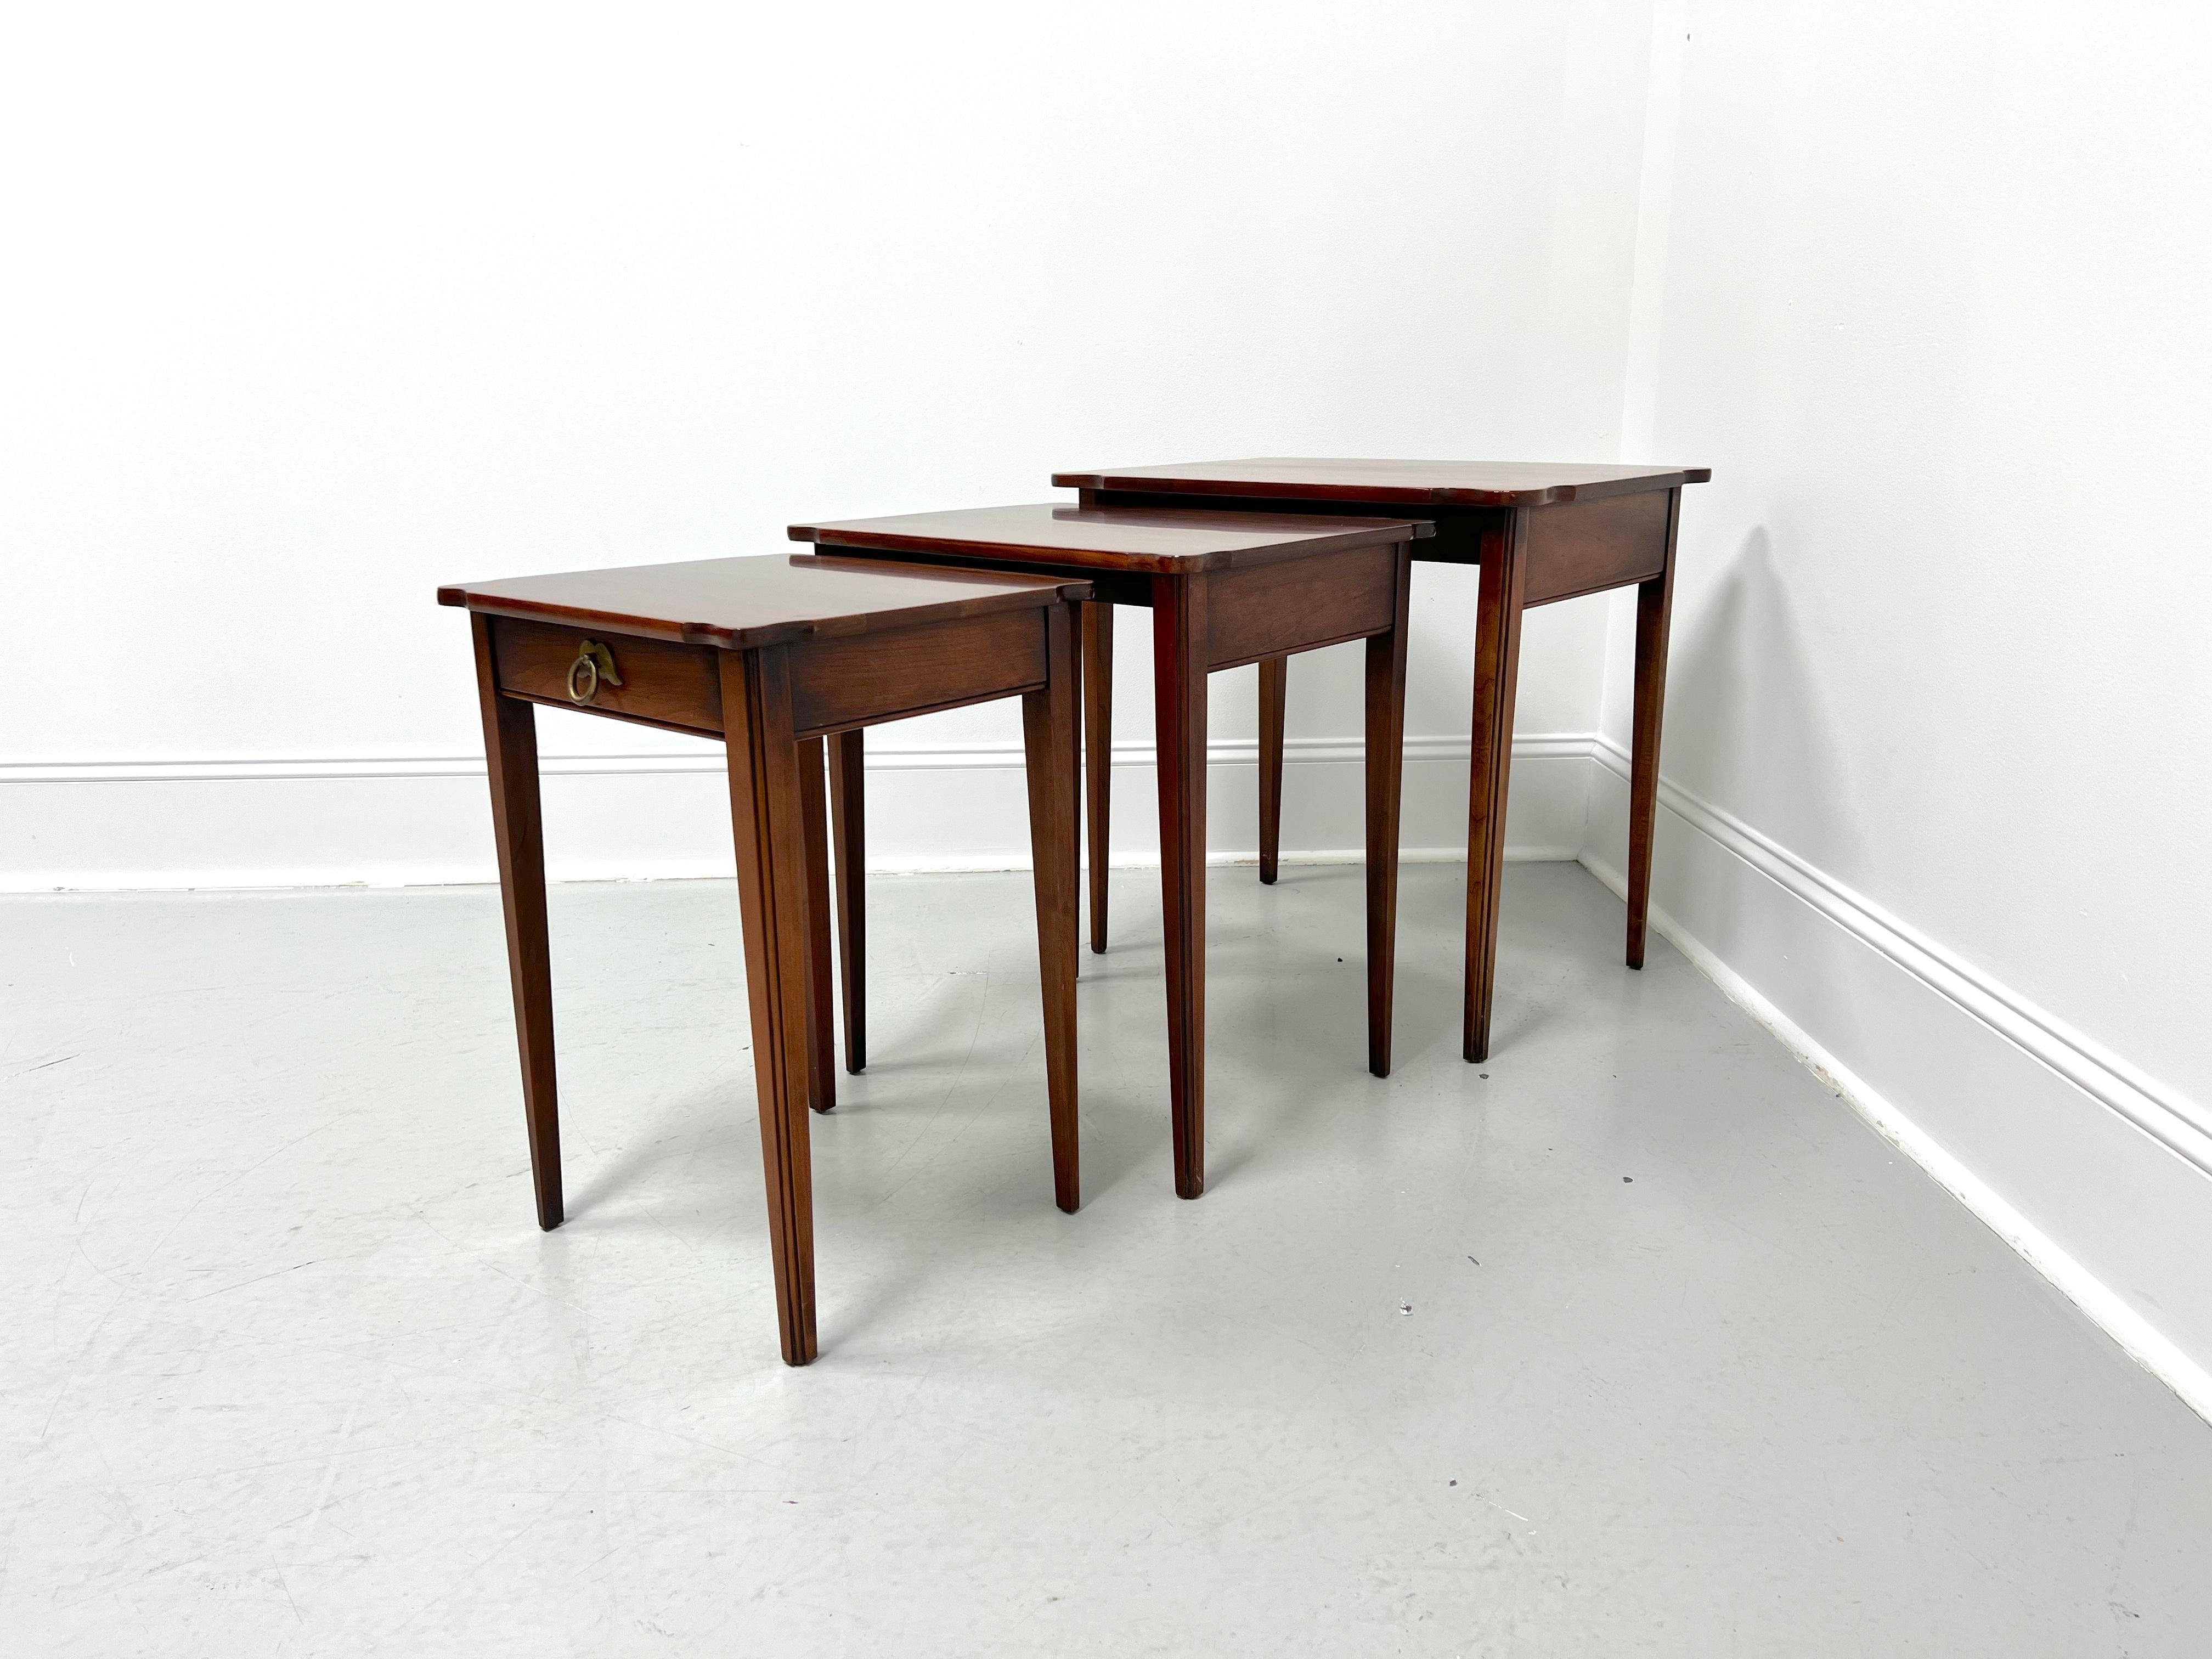 STATTON Centennial Cherry Chippendale Nesting Tables - Set of 3 In Good Condition For Sale In Charlotte, NC